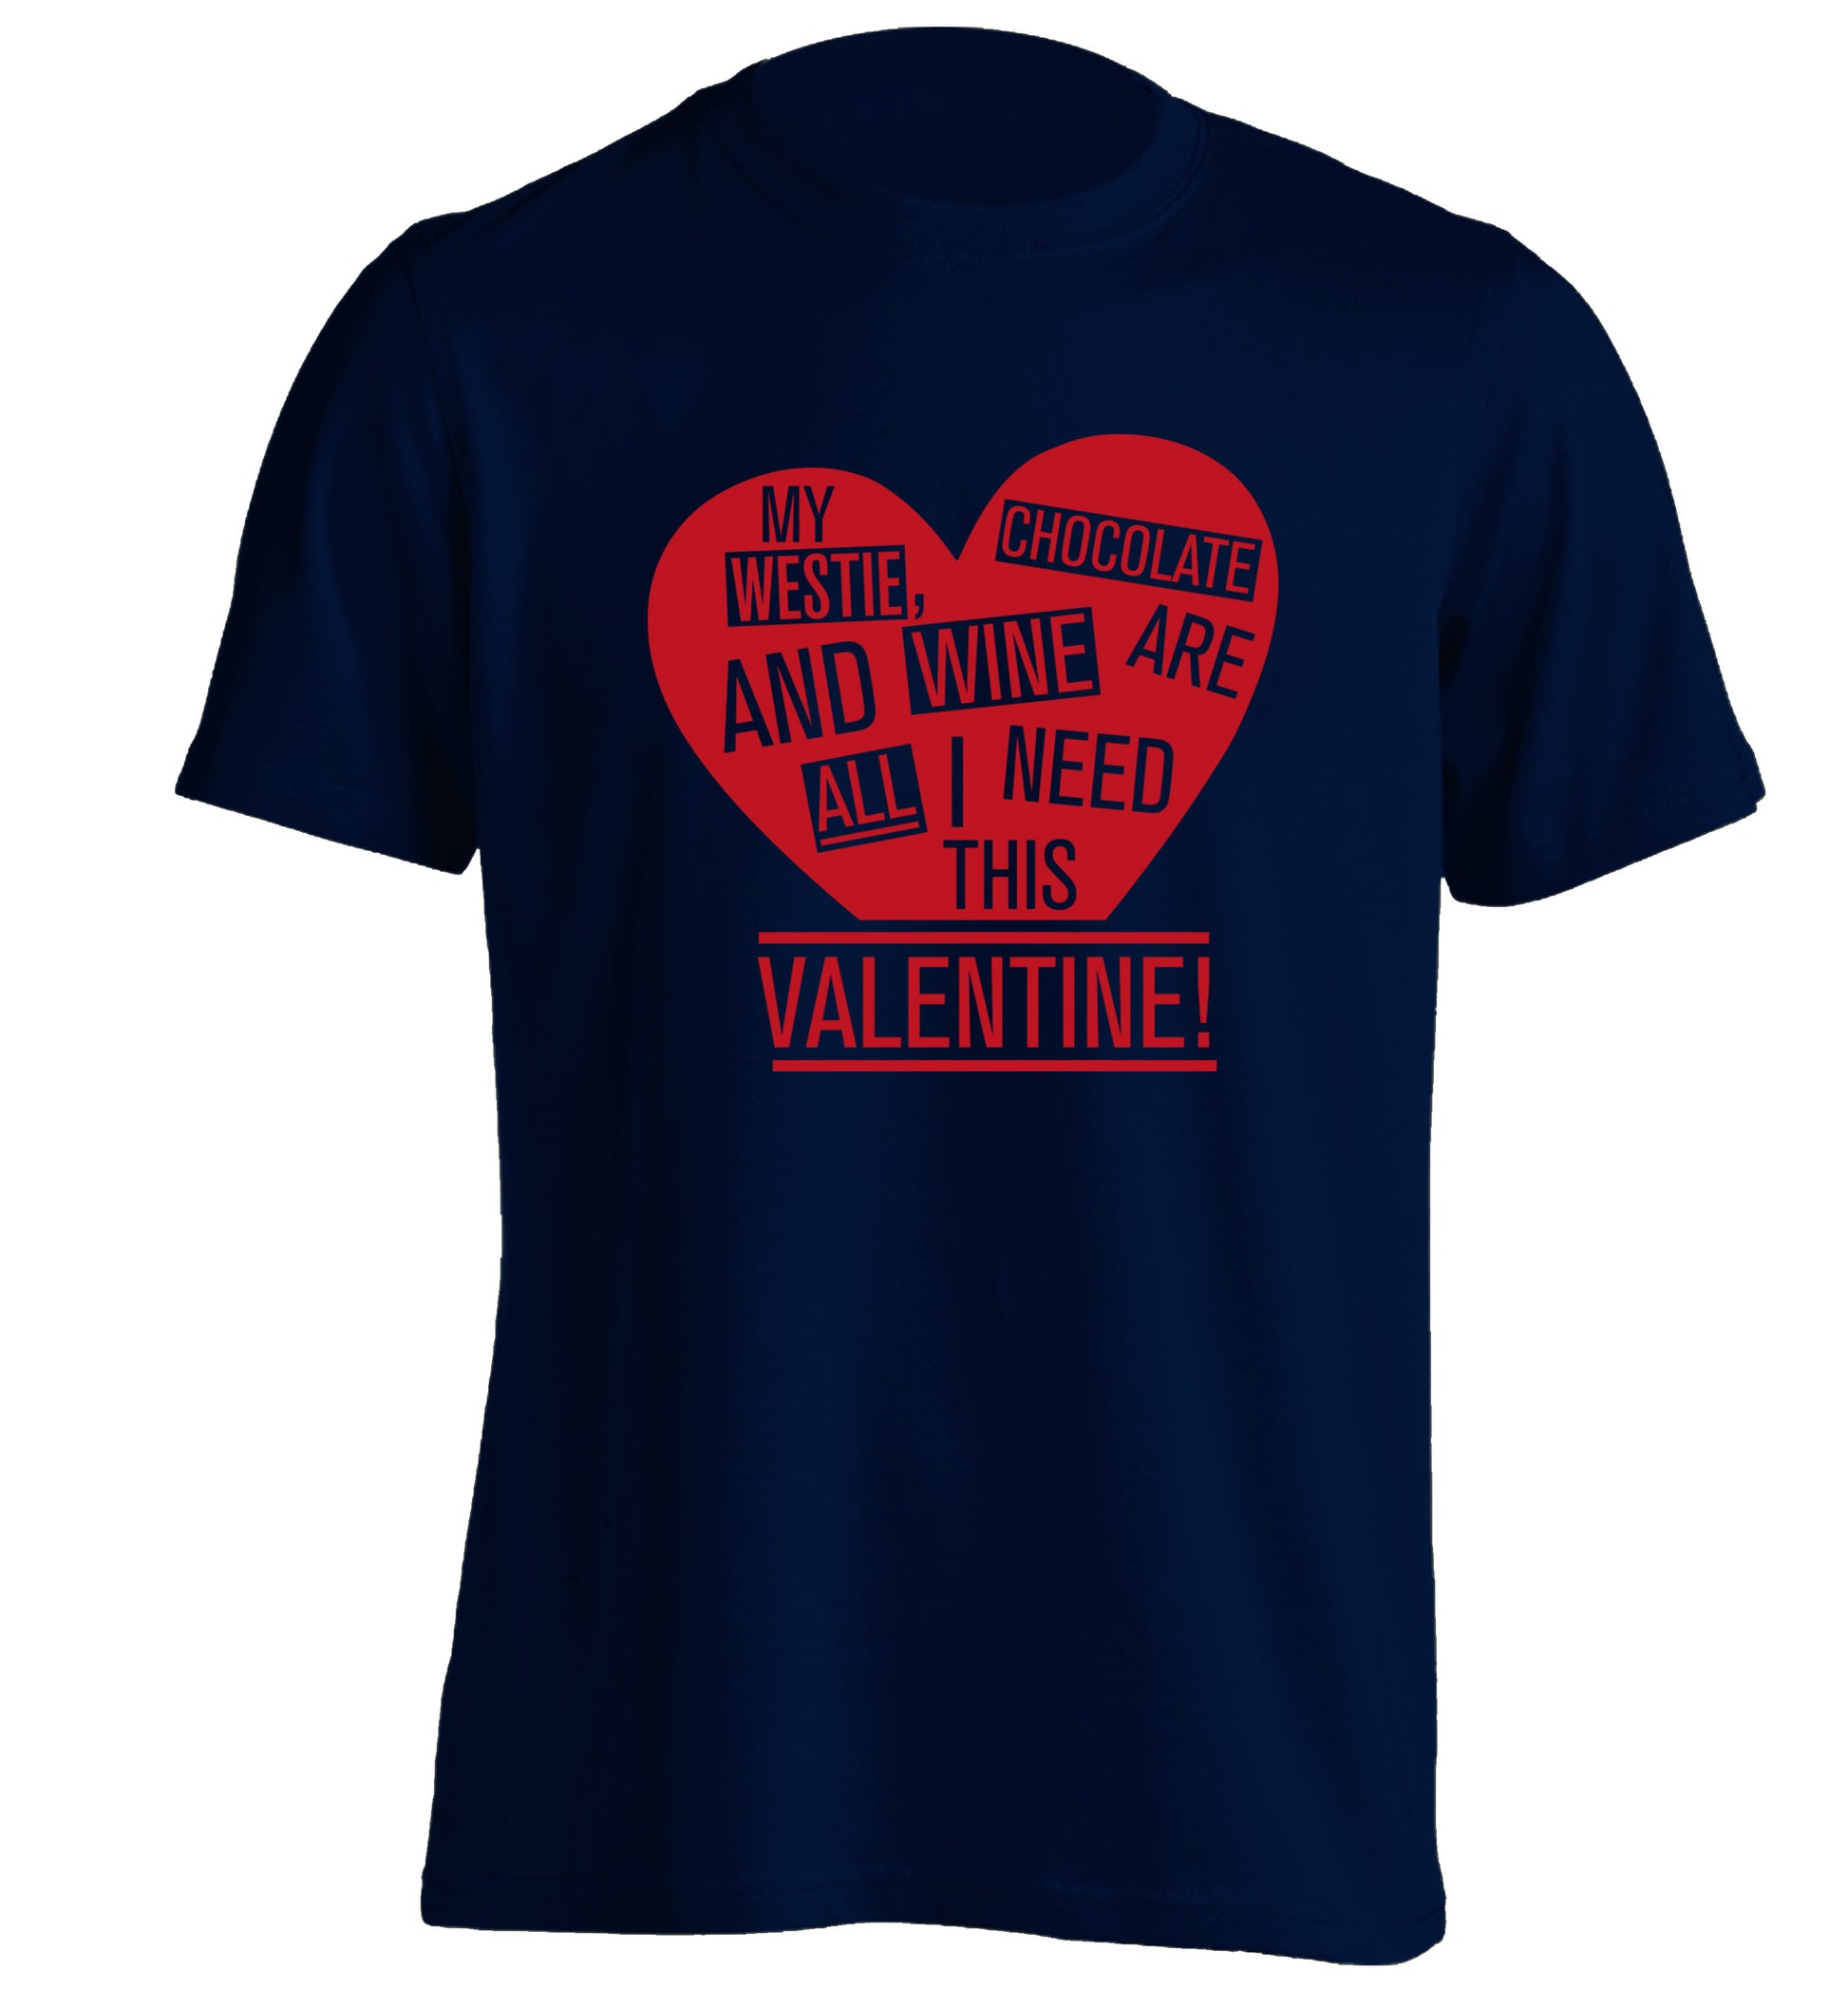 My westie, chocolate and wine are all I need this valentine! adults unisex navy Tshirt 2XL